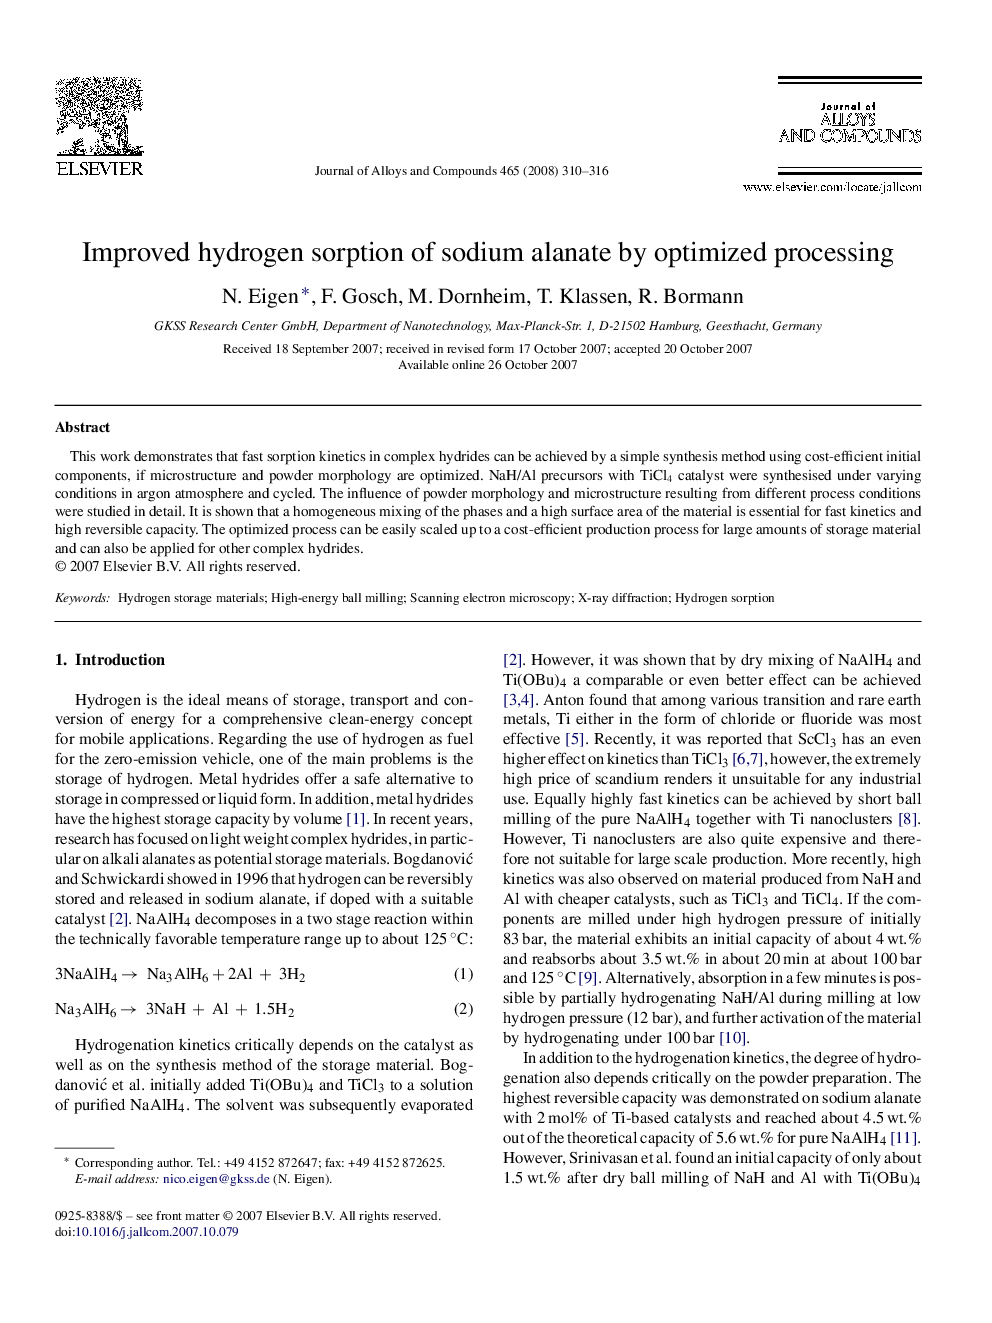 Improved hydrogen sorption of sodium alanate by optimized processing